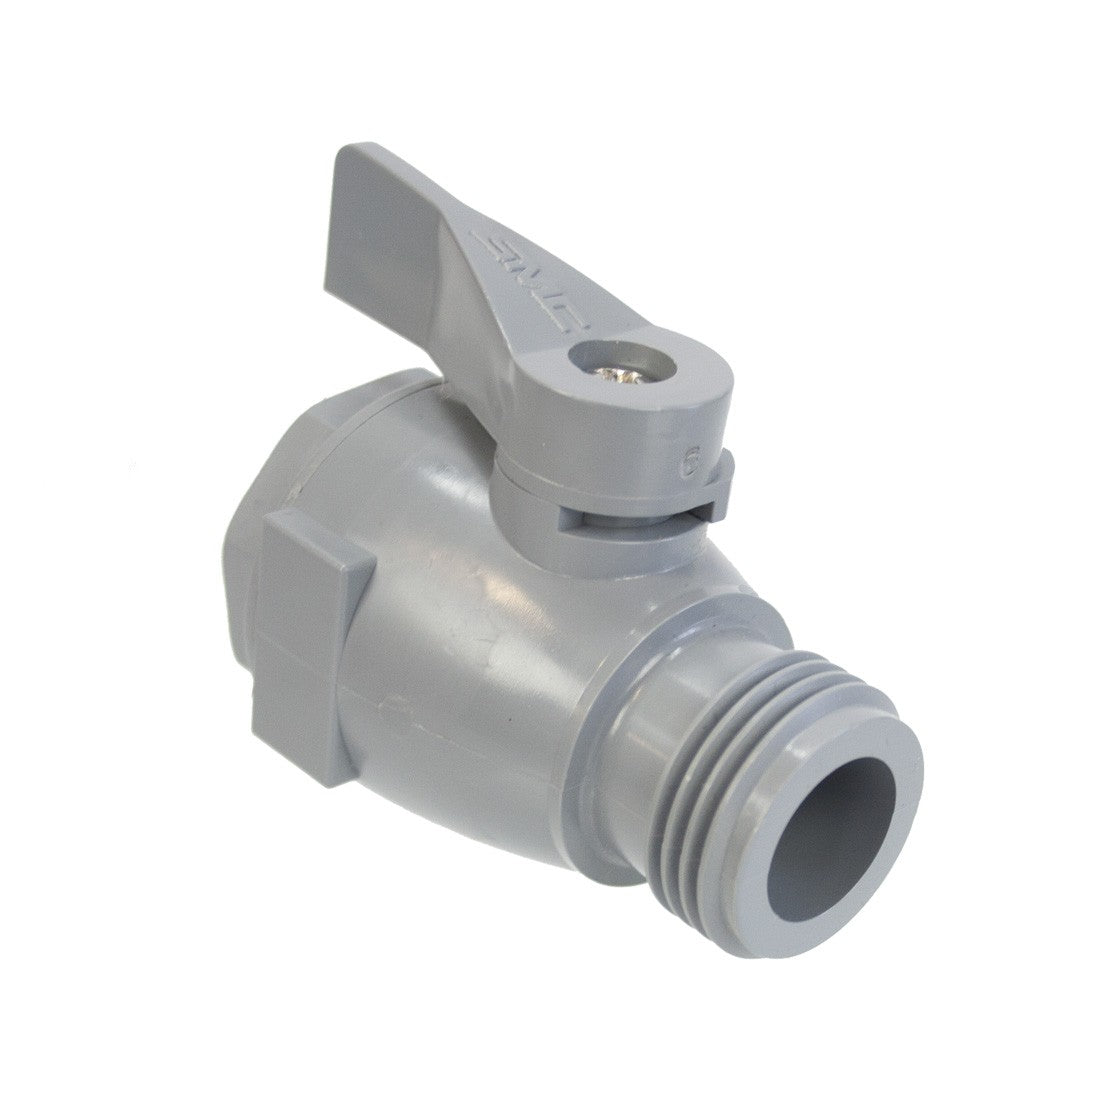 Ball Valve Replacement Parts